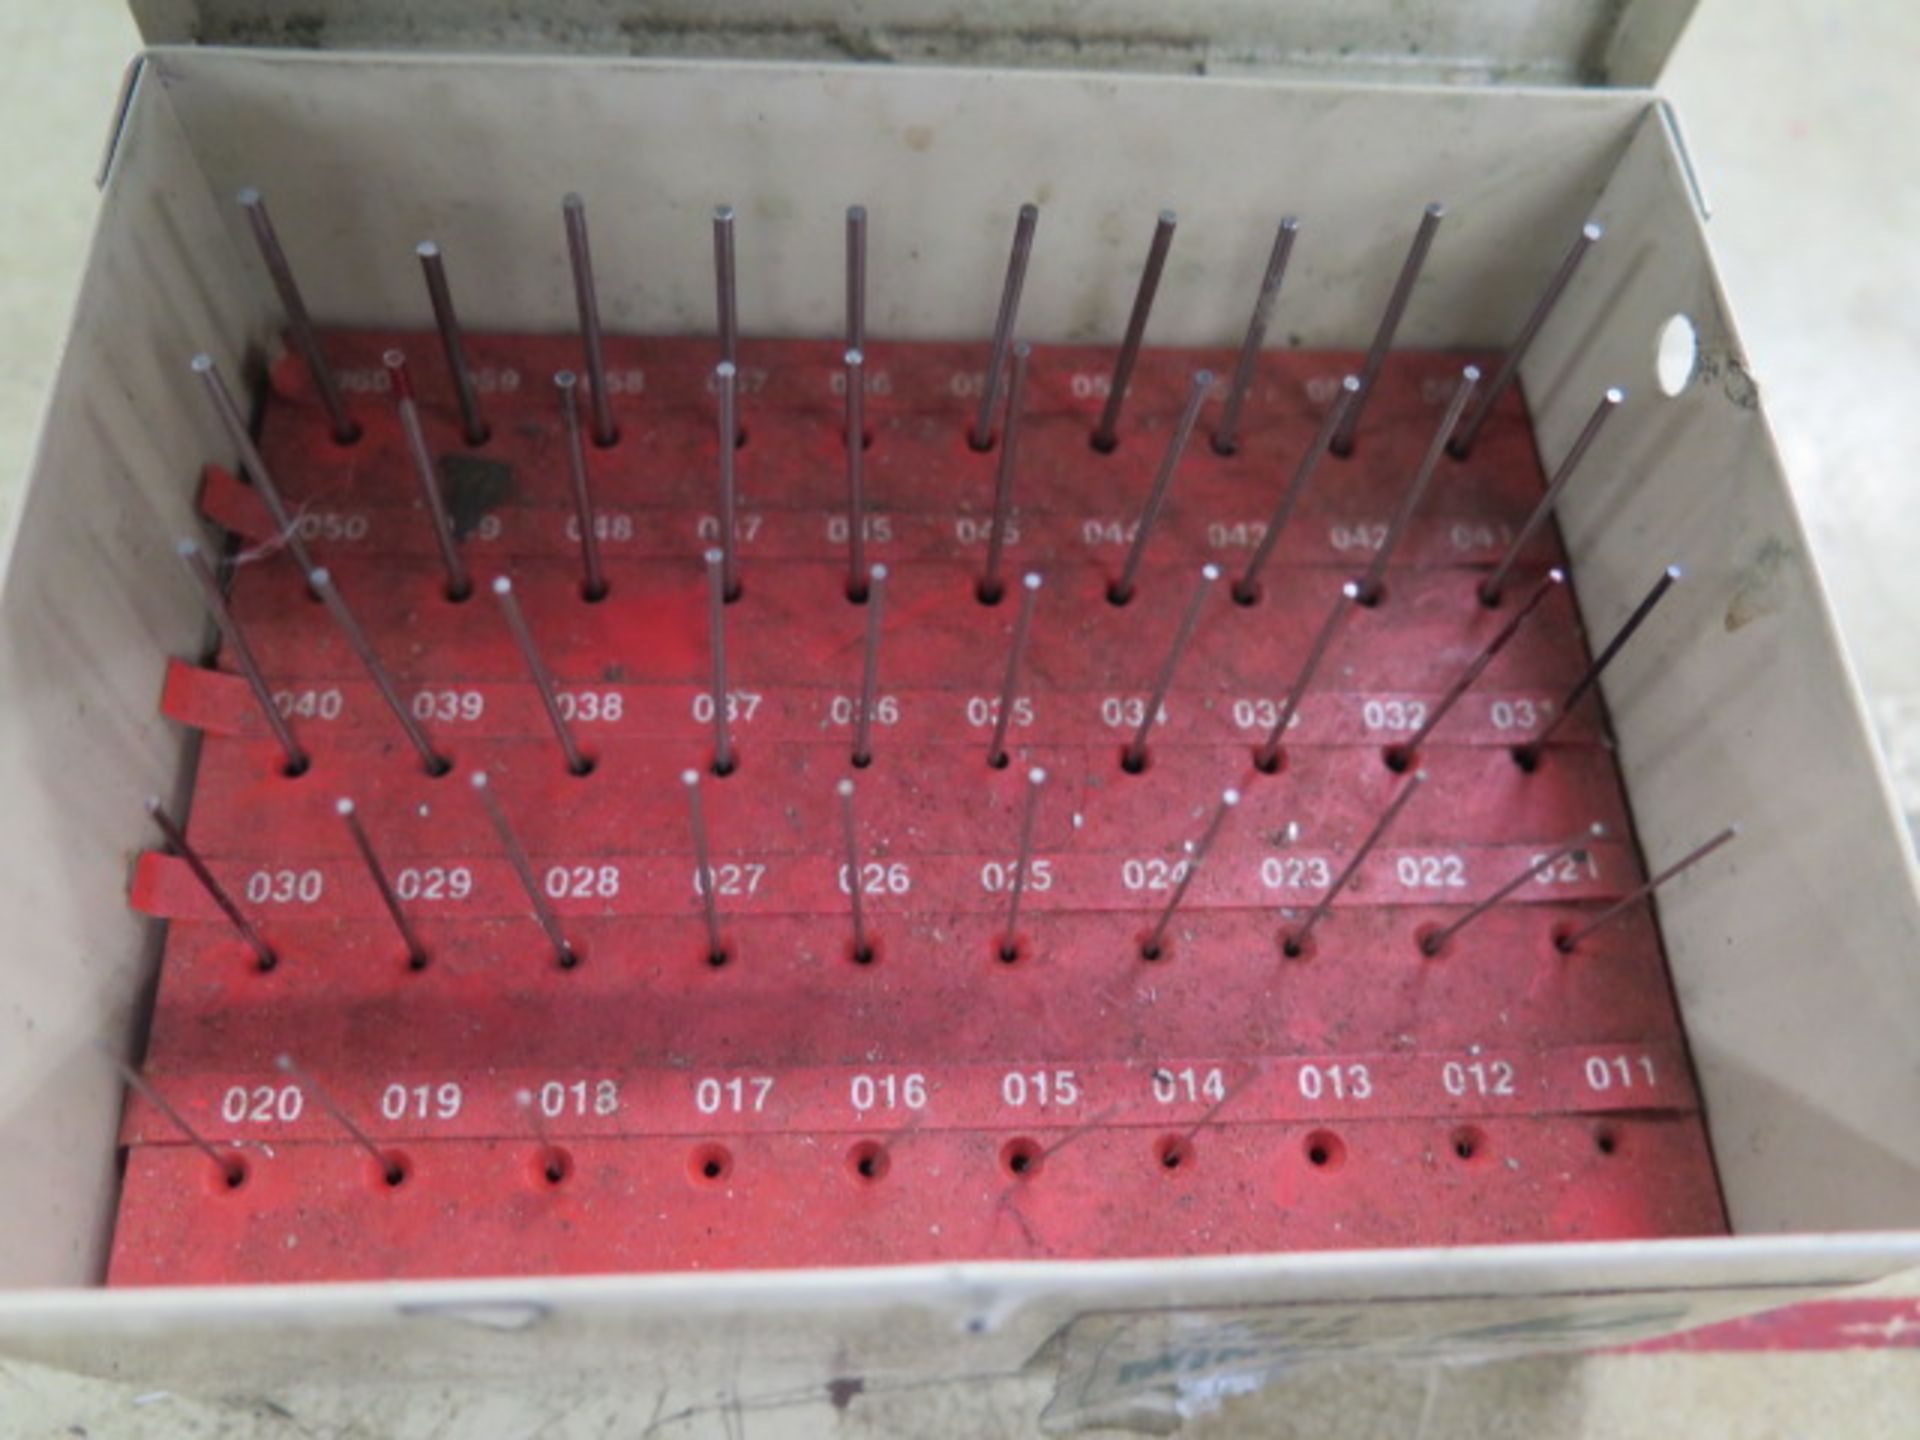 Vermont Pin Gage Sets 0.011"-0.060", 0.061"-.0.250" (2) and 0.251"-0.500" - Image 6 of 6